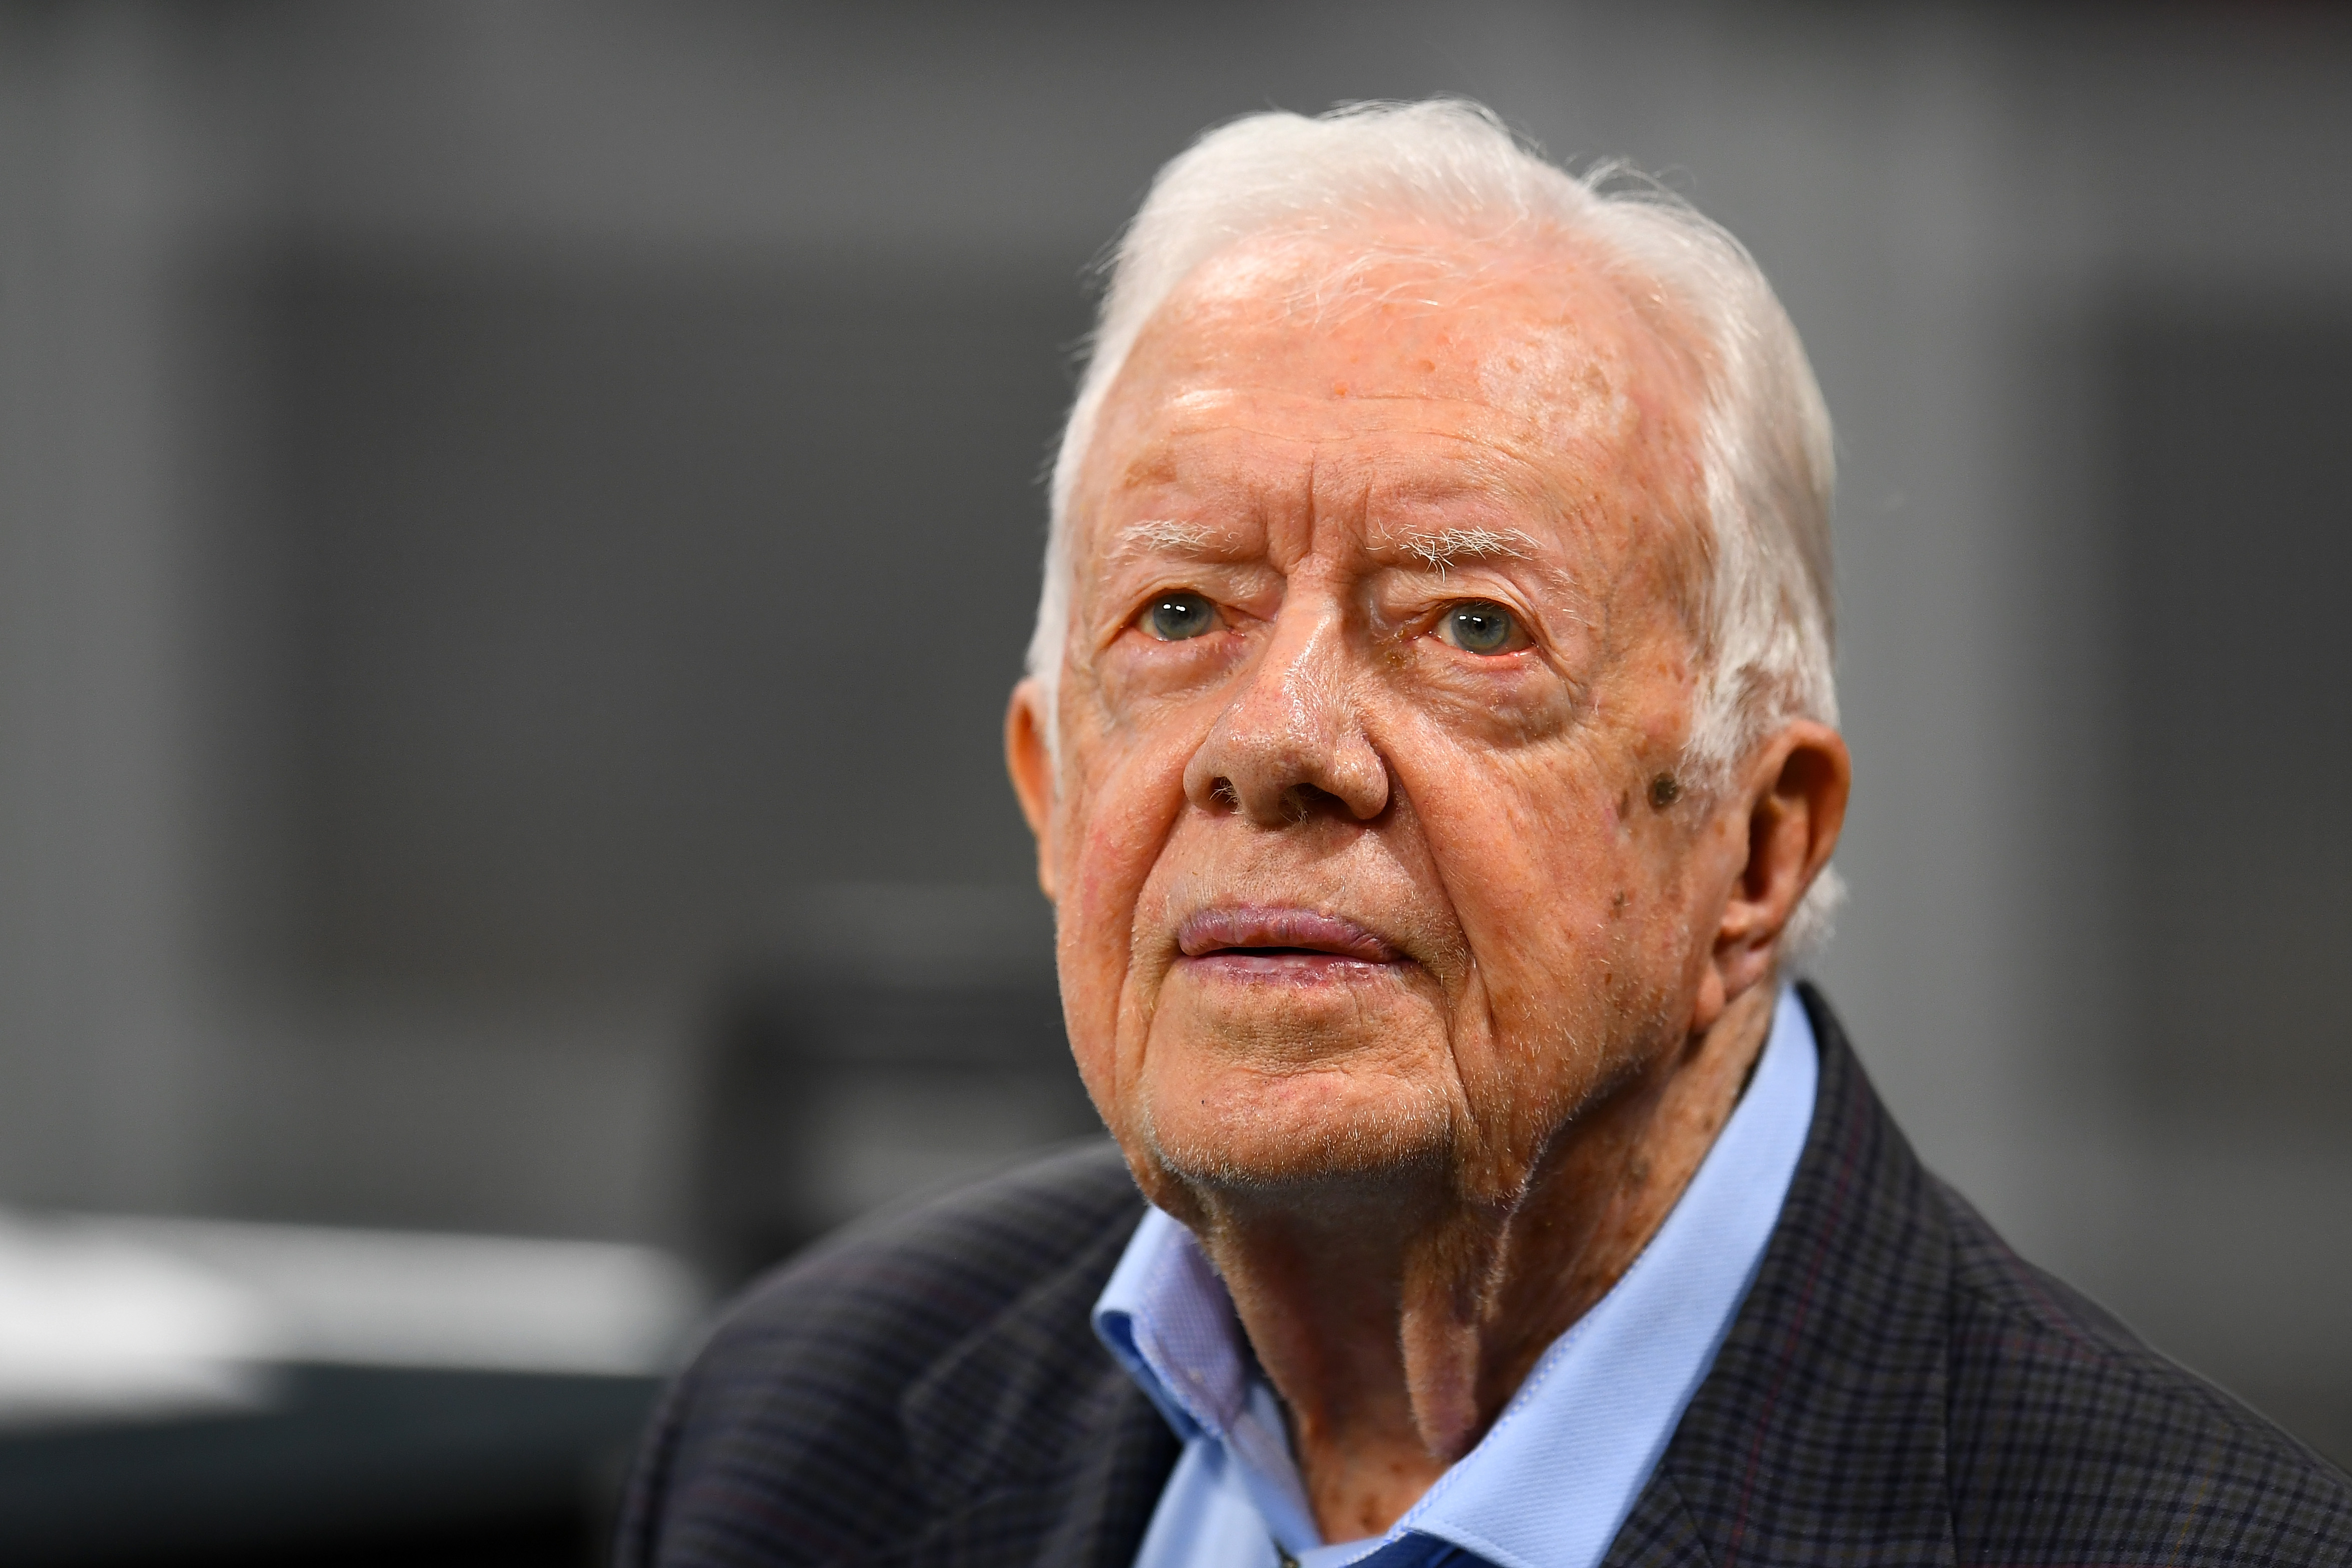 Jimmy Carter prior to the game between the Atlanta Falcons and the Cincinnati Bengals at Mercedes-Benz Stadium in Atlanta, Georgia, on September 30, 2018. | Source: Getty Images